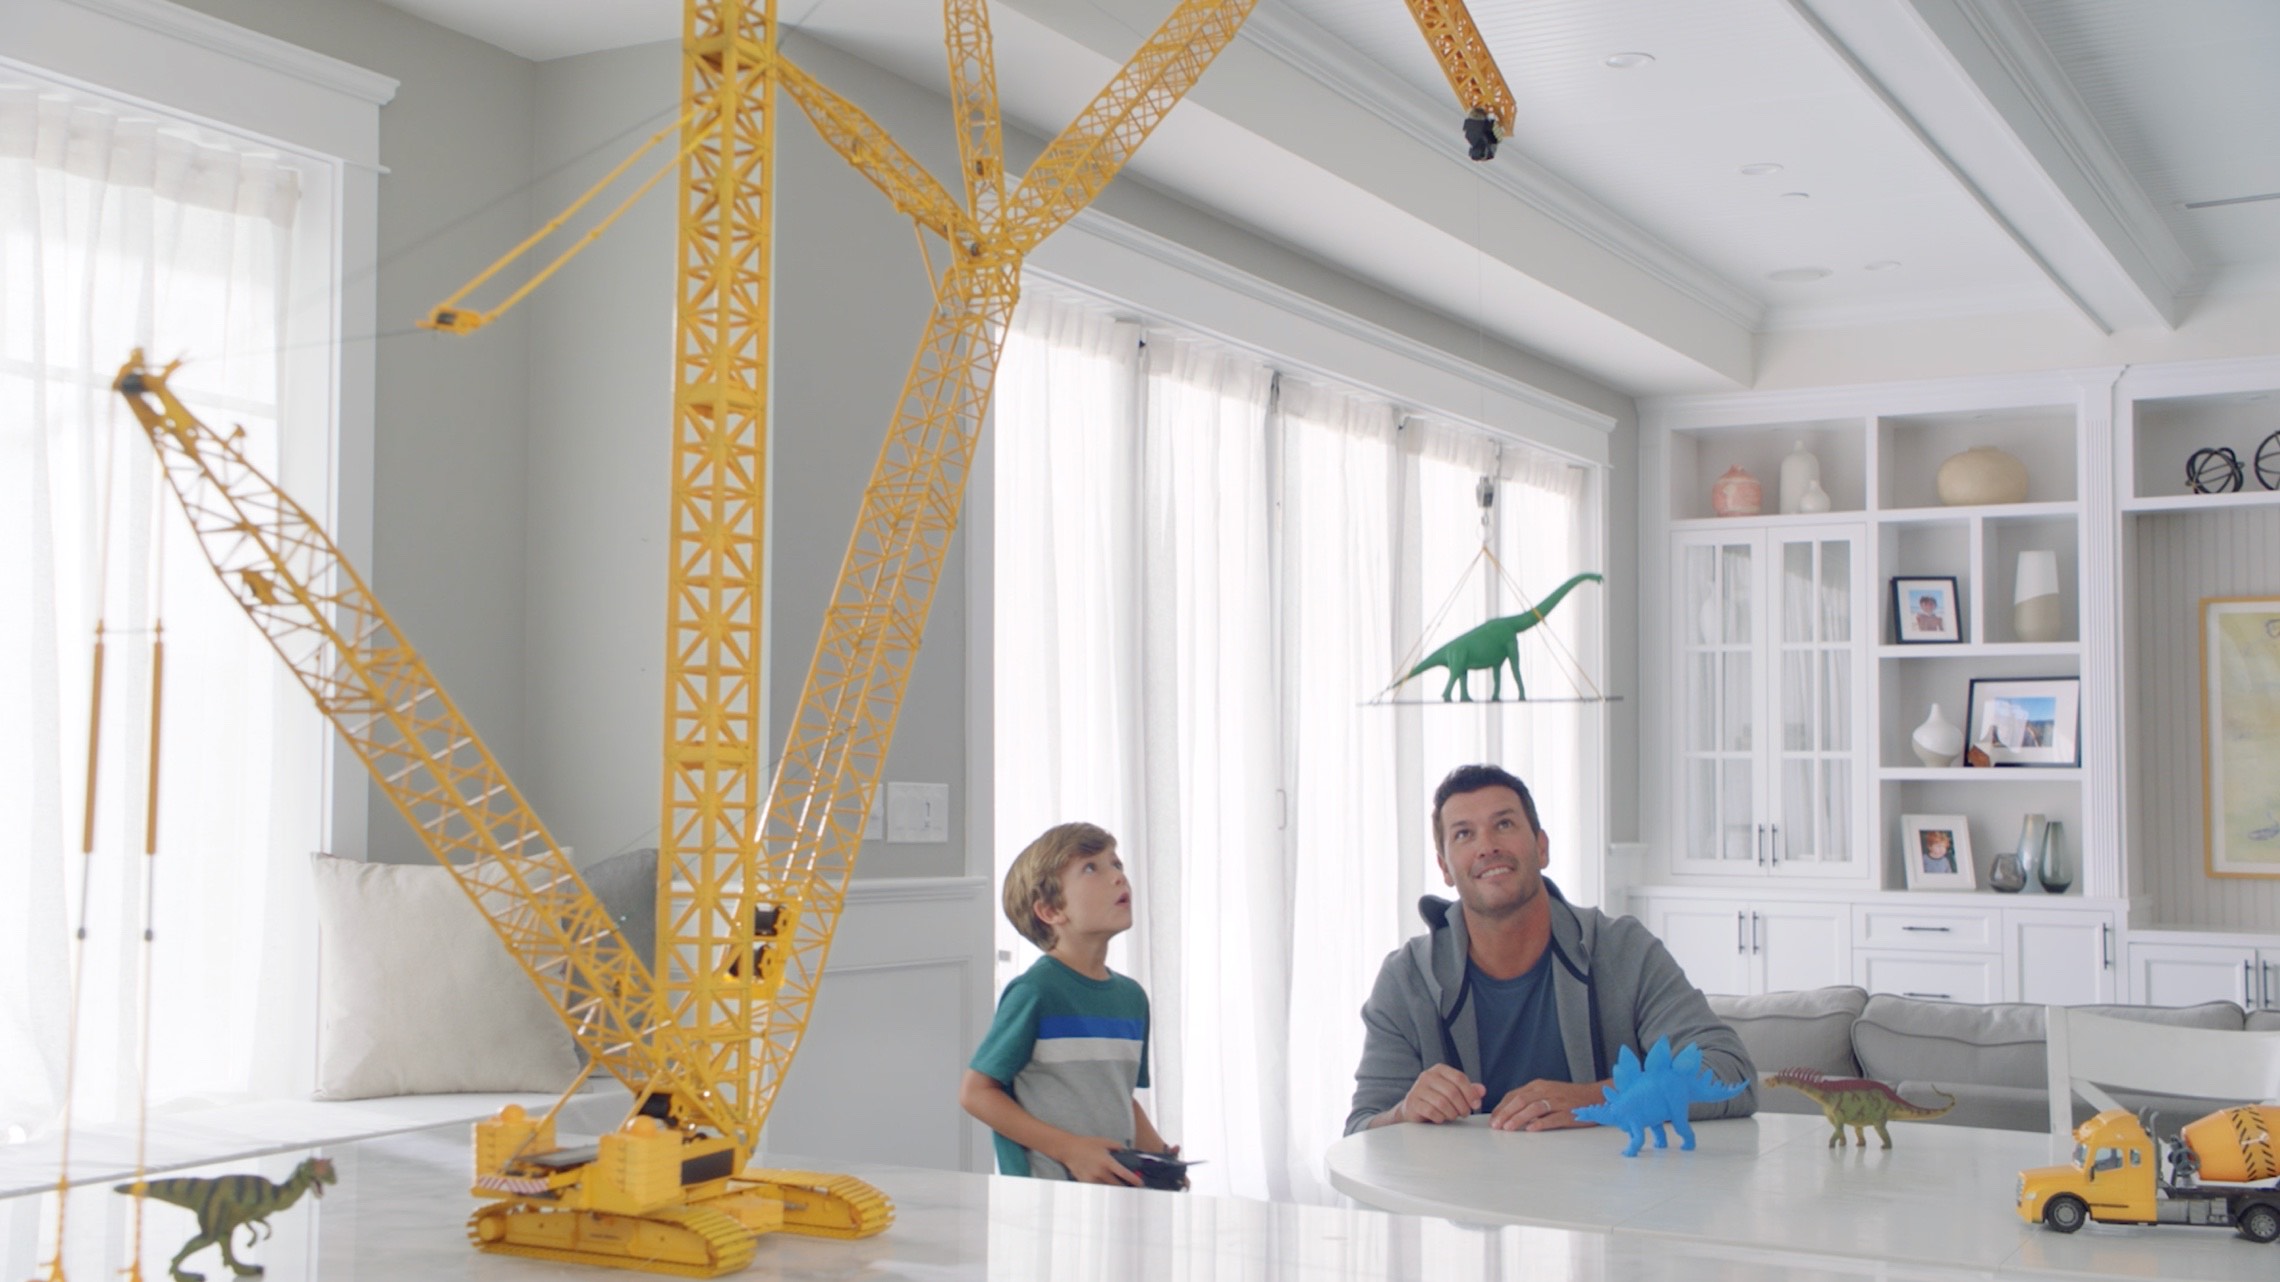 Click to watch the "crane" video.